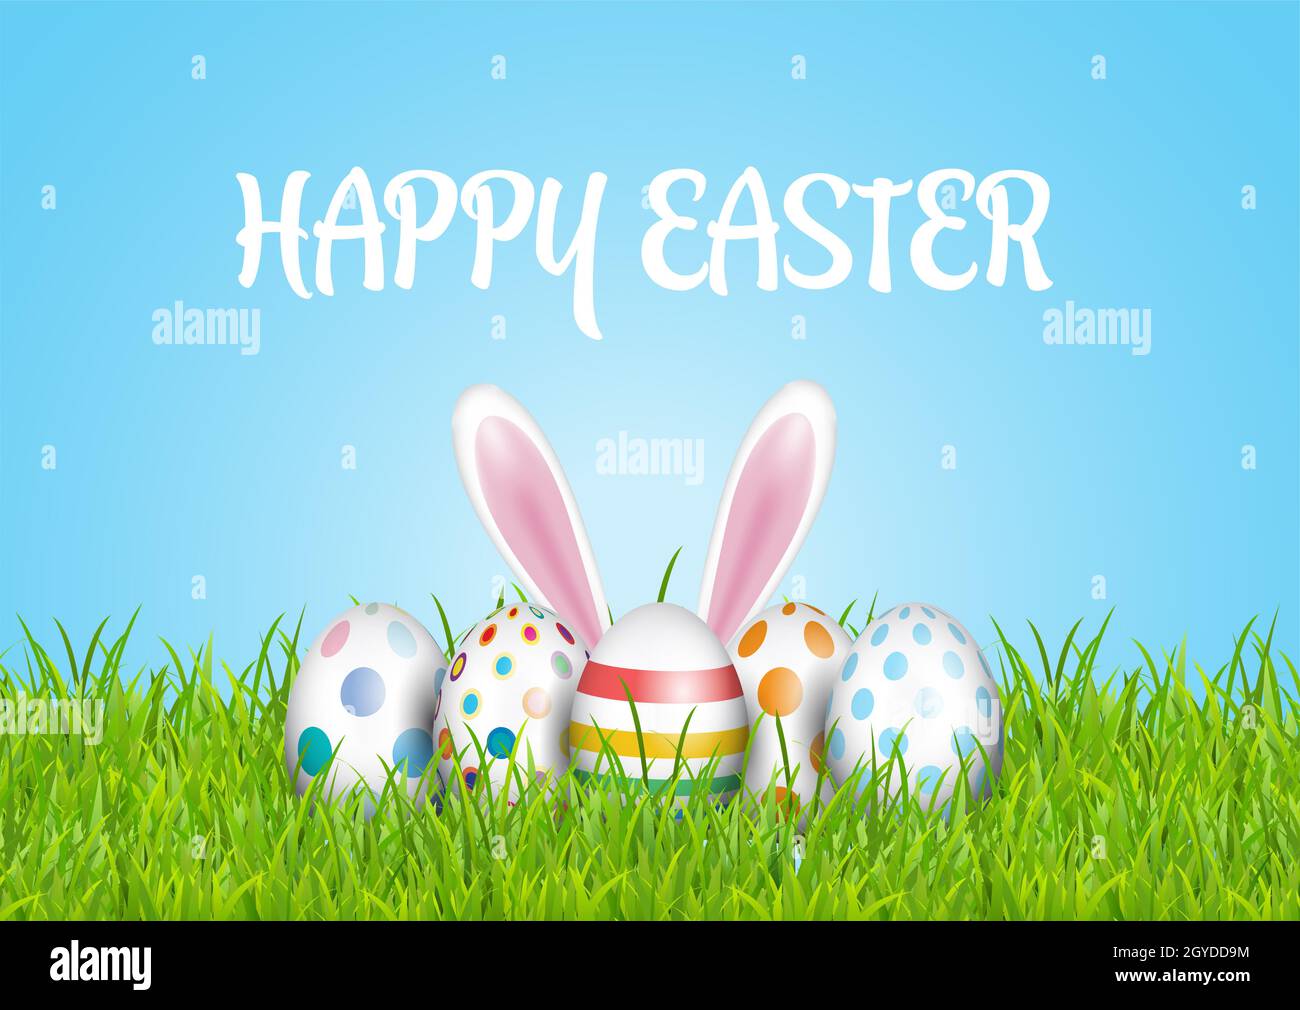 Cute Easter background with eggs and bunny nestled in grass Stock Photo